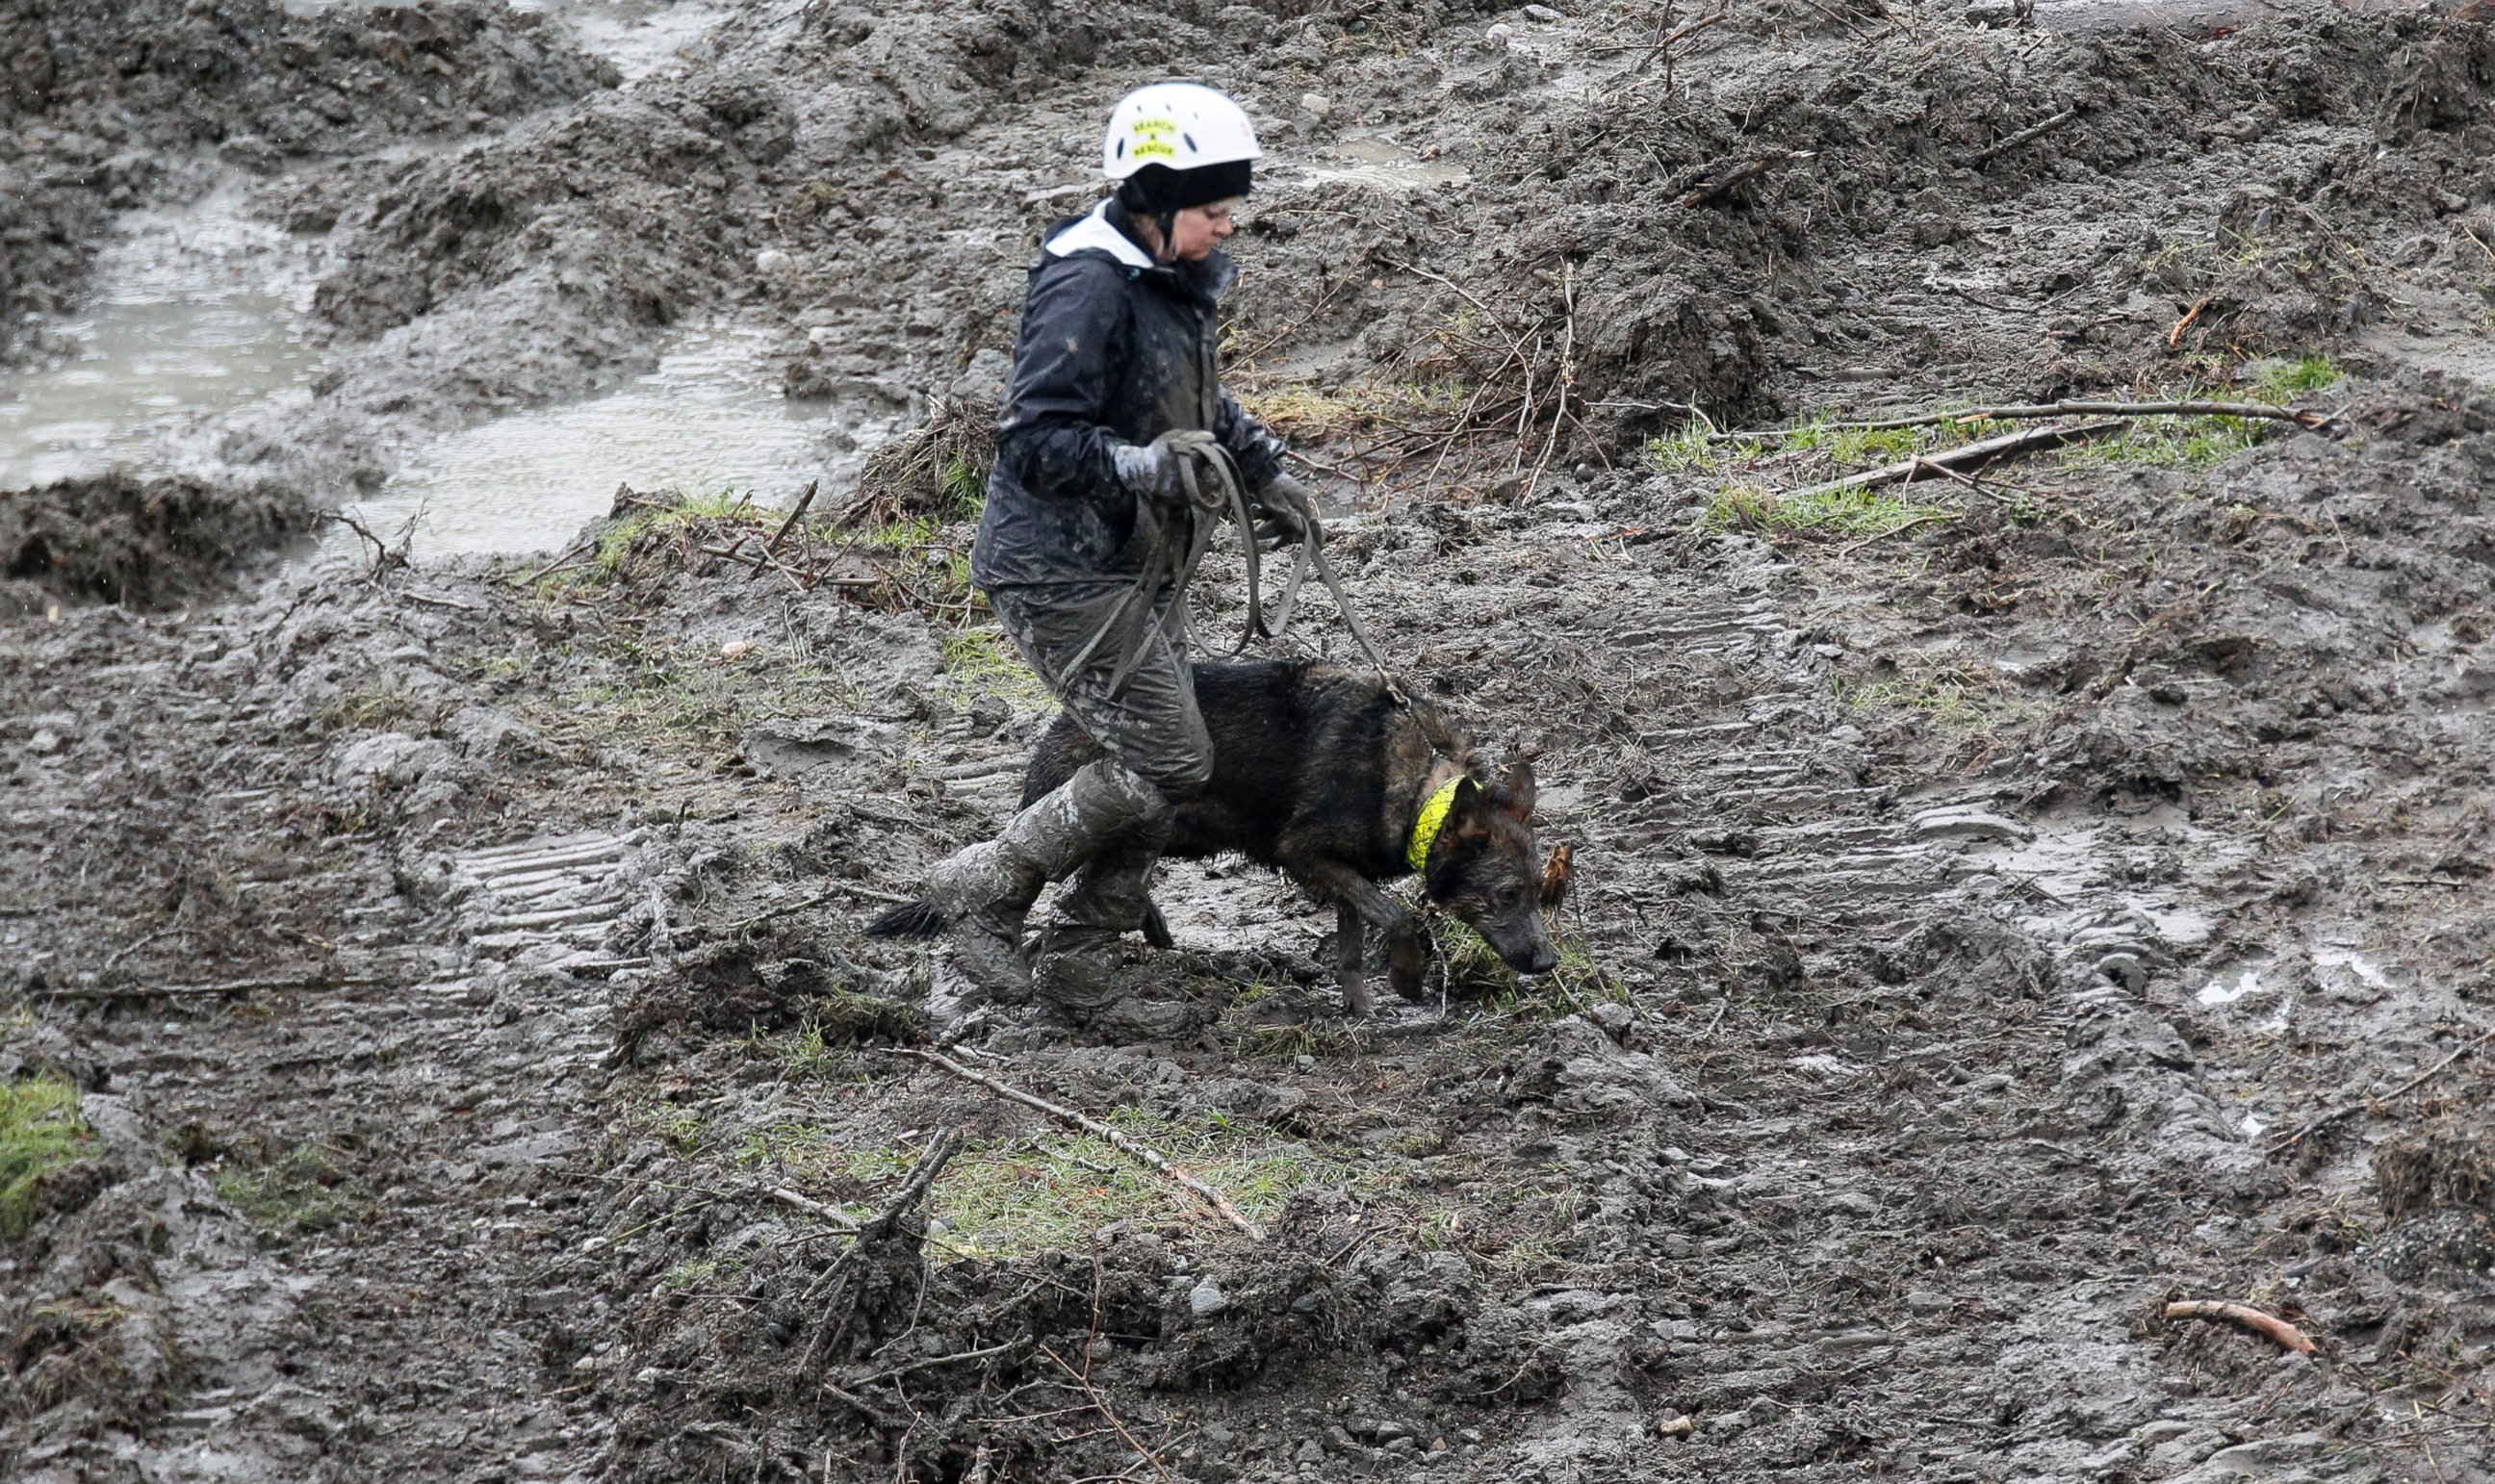 PHOTO: A rescue worker searches for victims of a mudslide with a rescue dog in Oso, Wash., March 30, 2014.